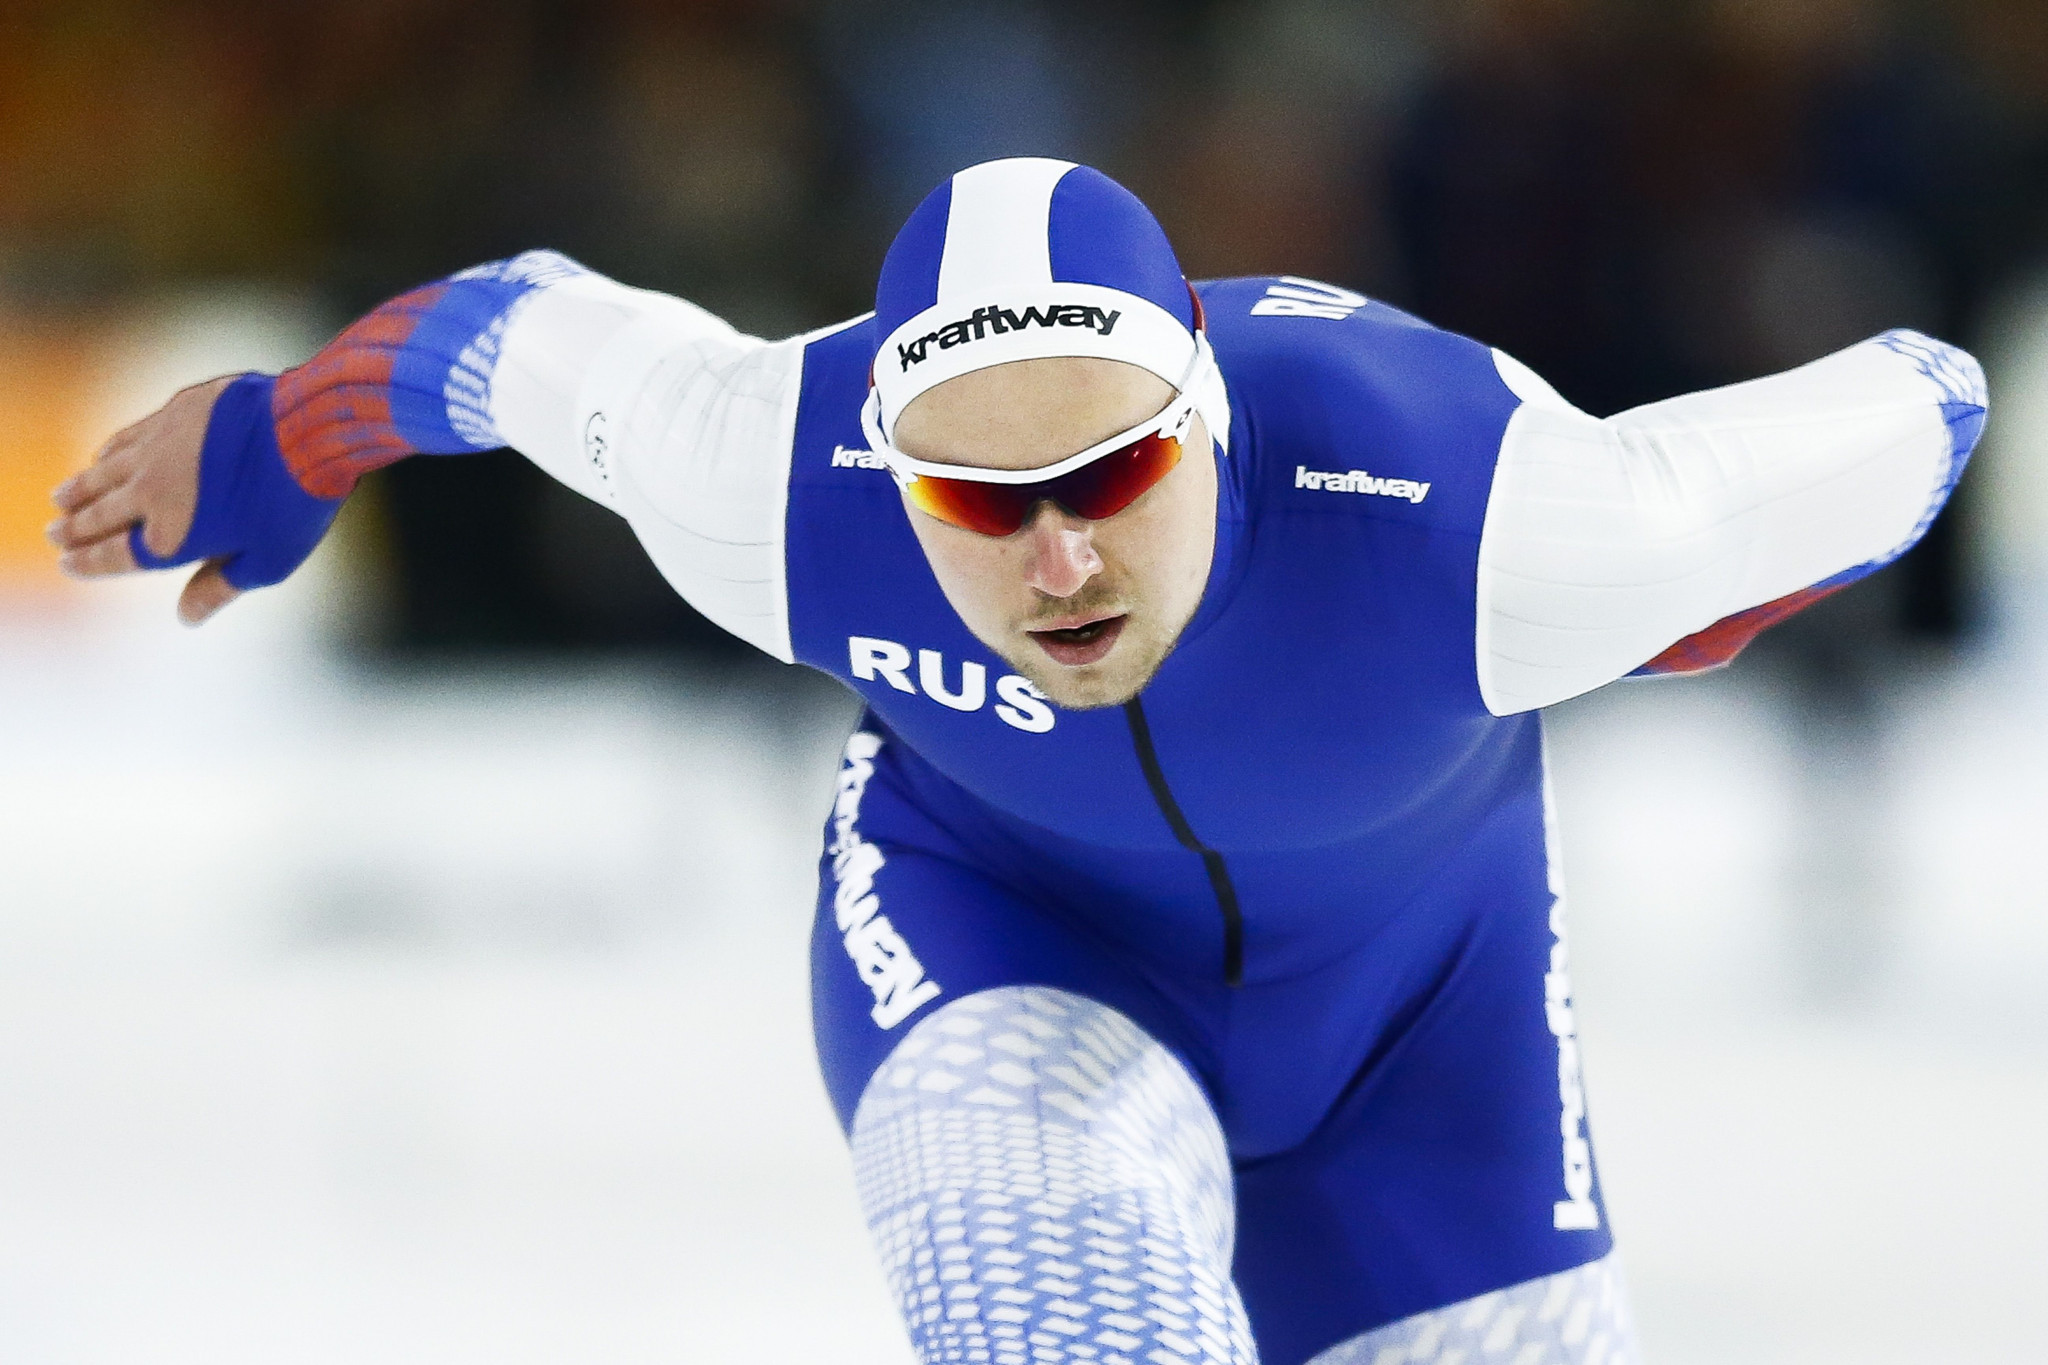 Pavel Kulizhnikov is the big favourite in the men's sprint event ©Getty Images